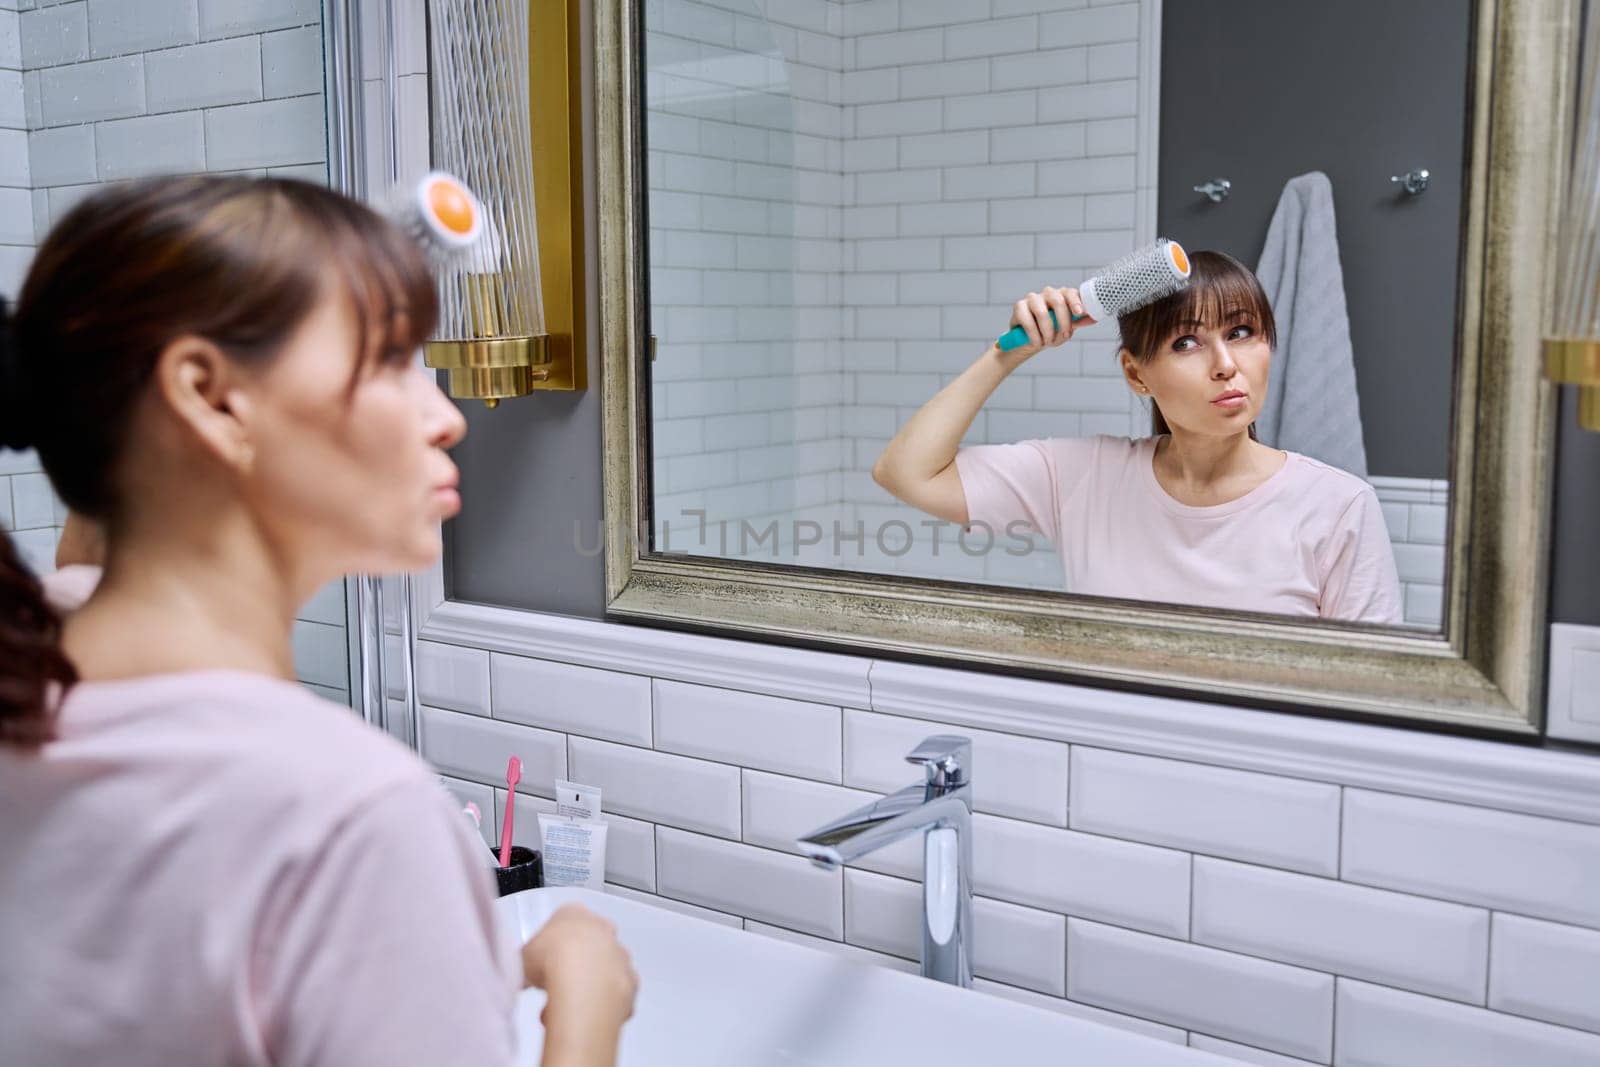 Middle-aged woman with hairspray comb looking in mirror, doing hair styling, in bathroom. Beauty, age, cosmetics, hair accessories